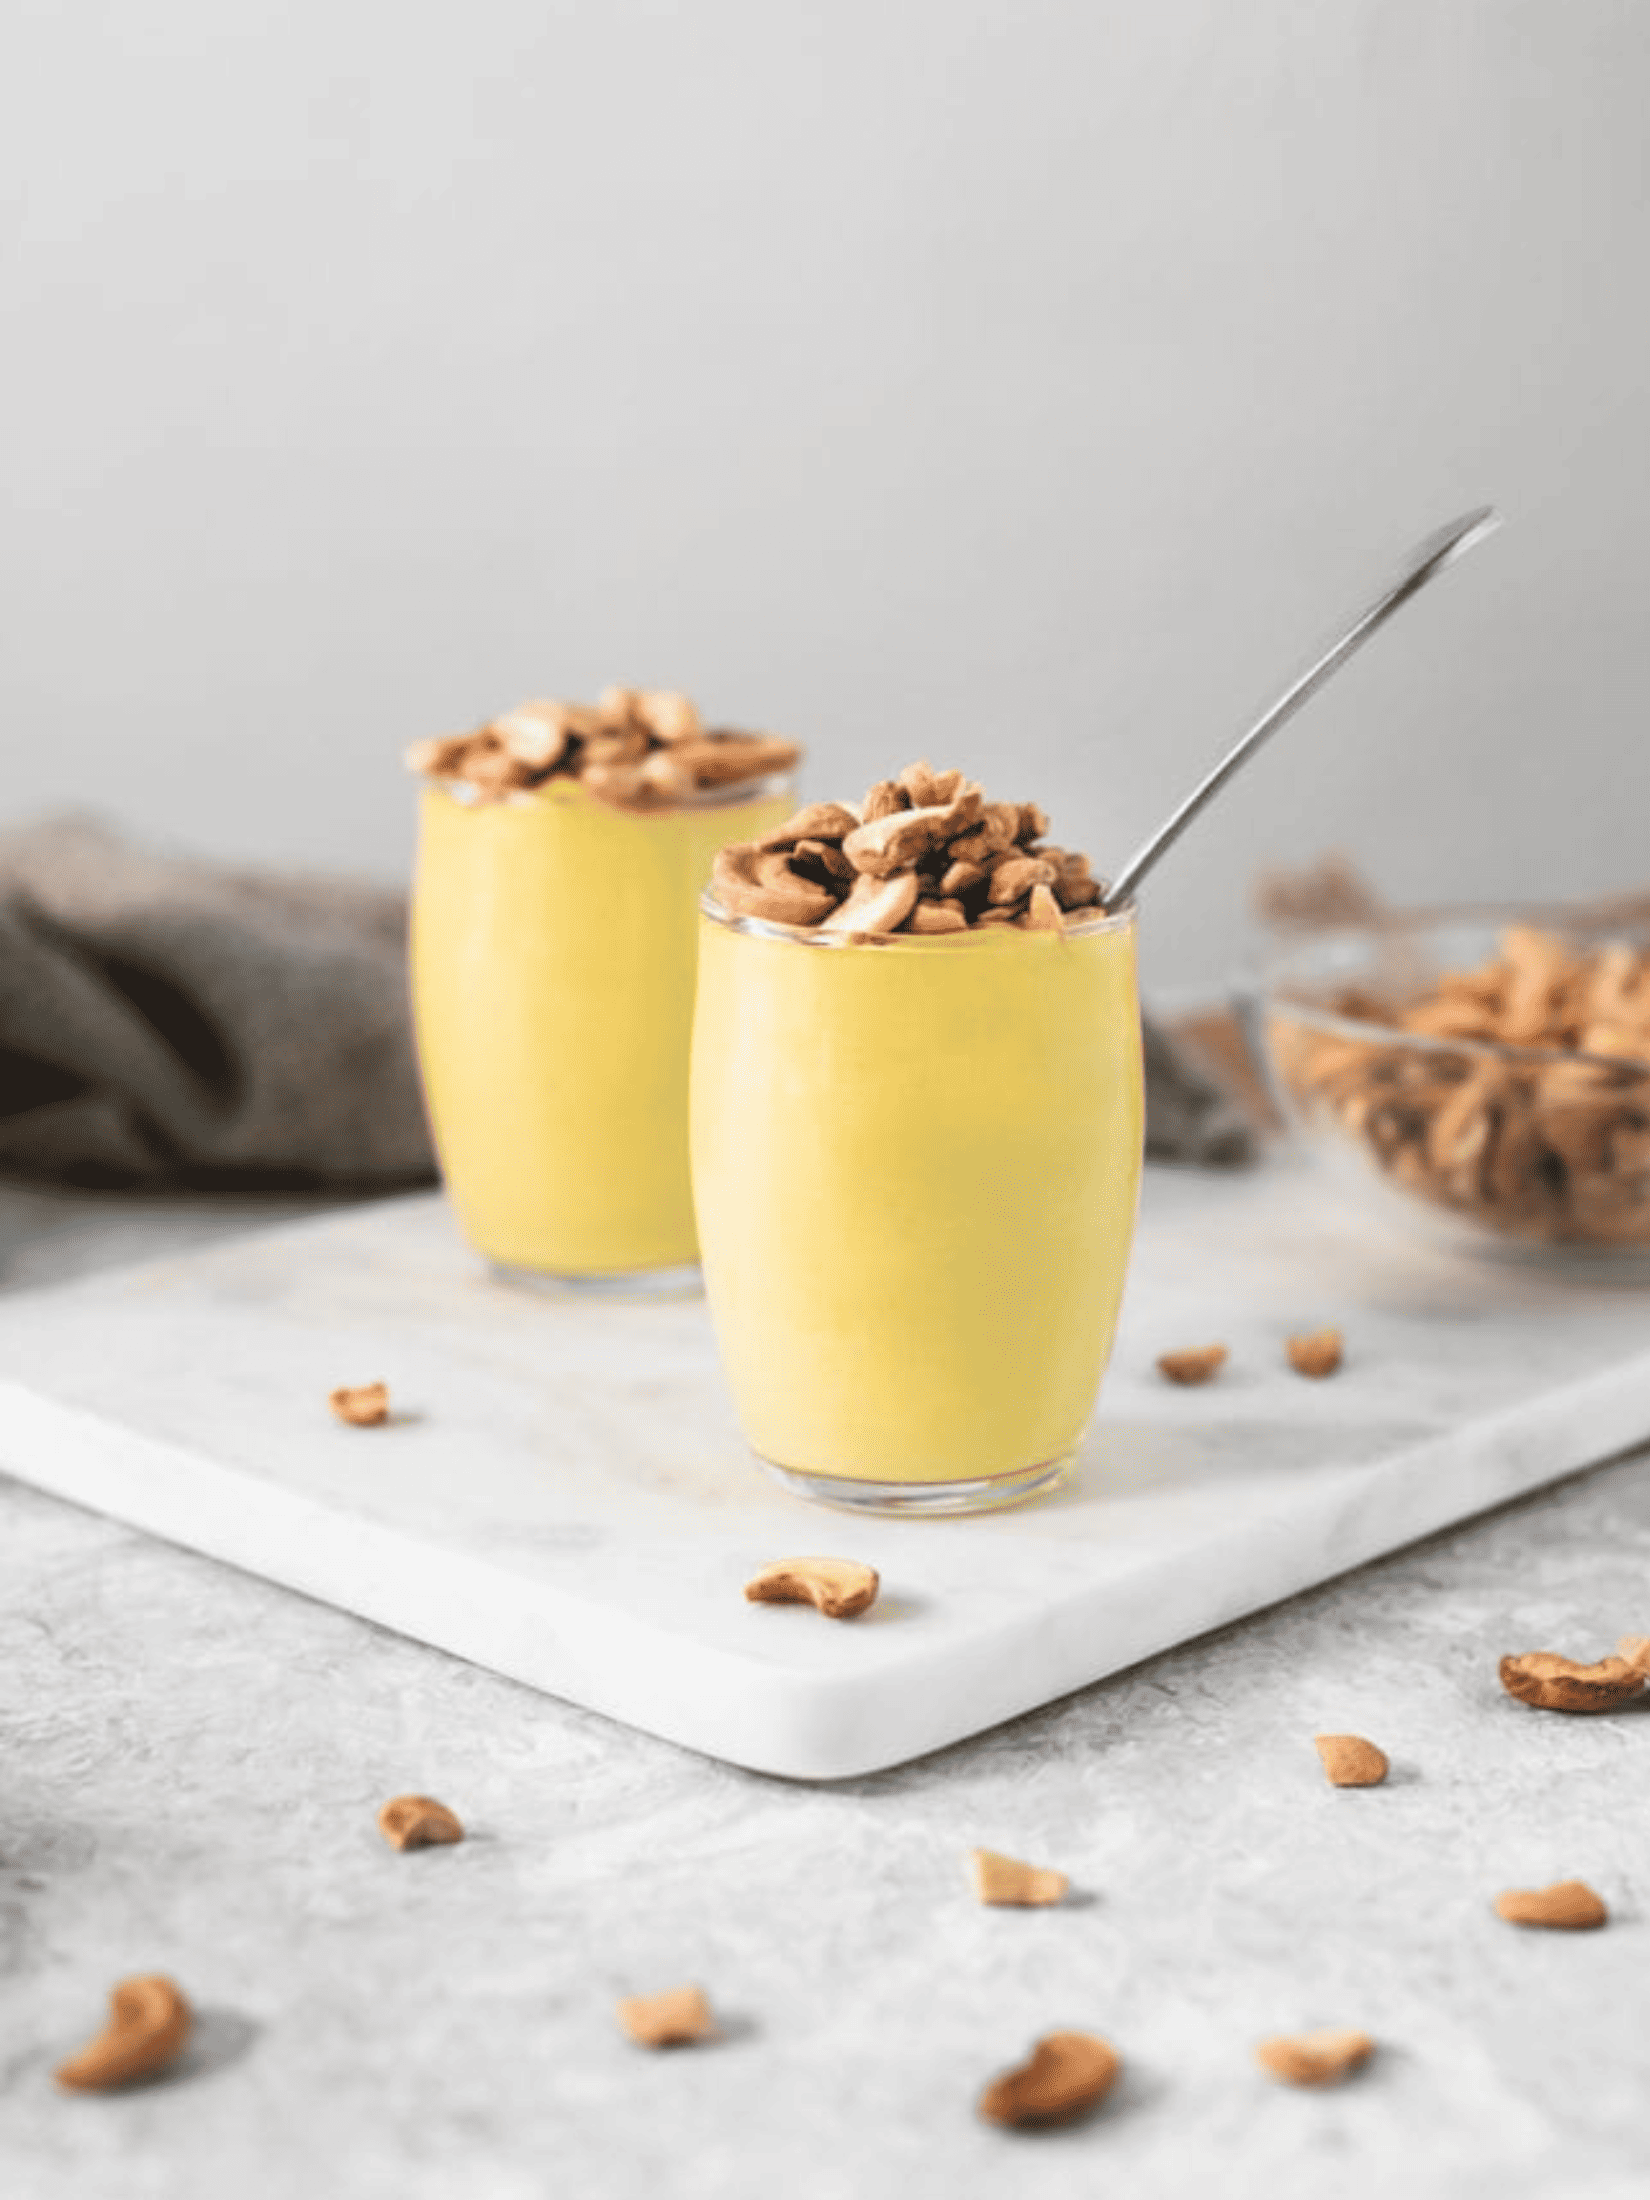 delicious banana cream turmeric pudding served in a glass bowl.